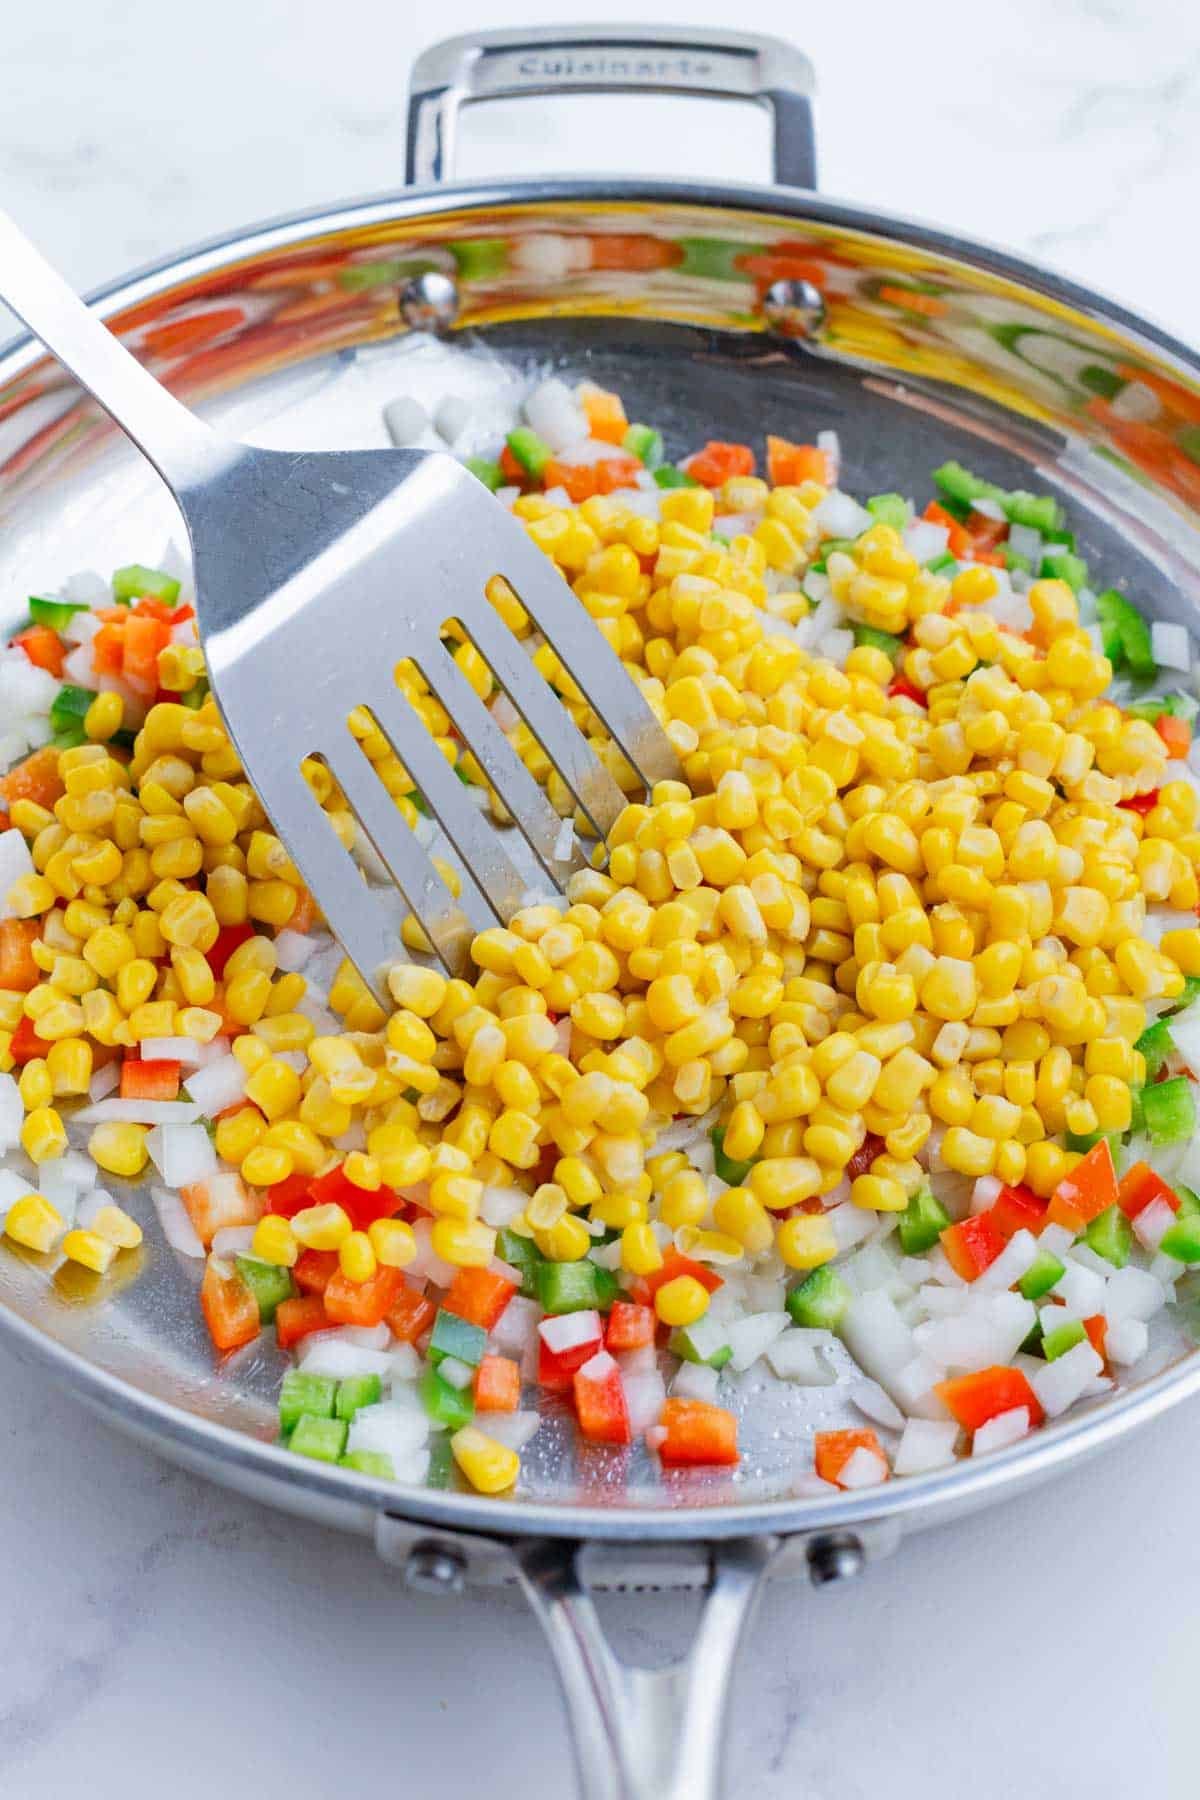 The corn is added to the sauteed veggies.